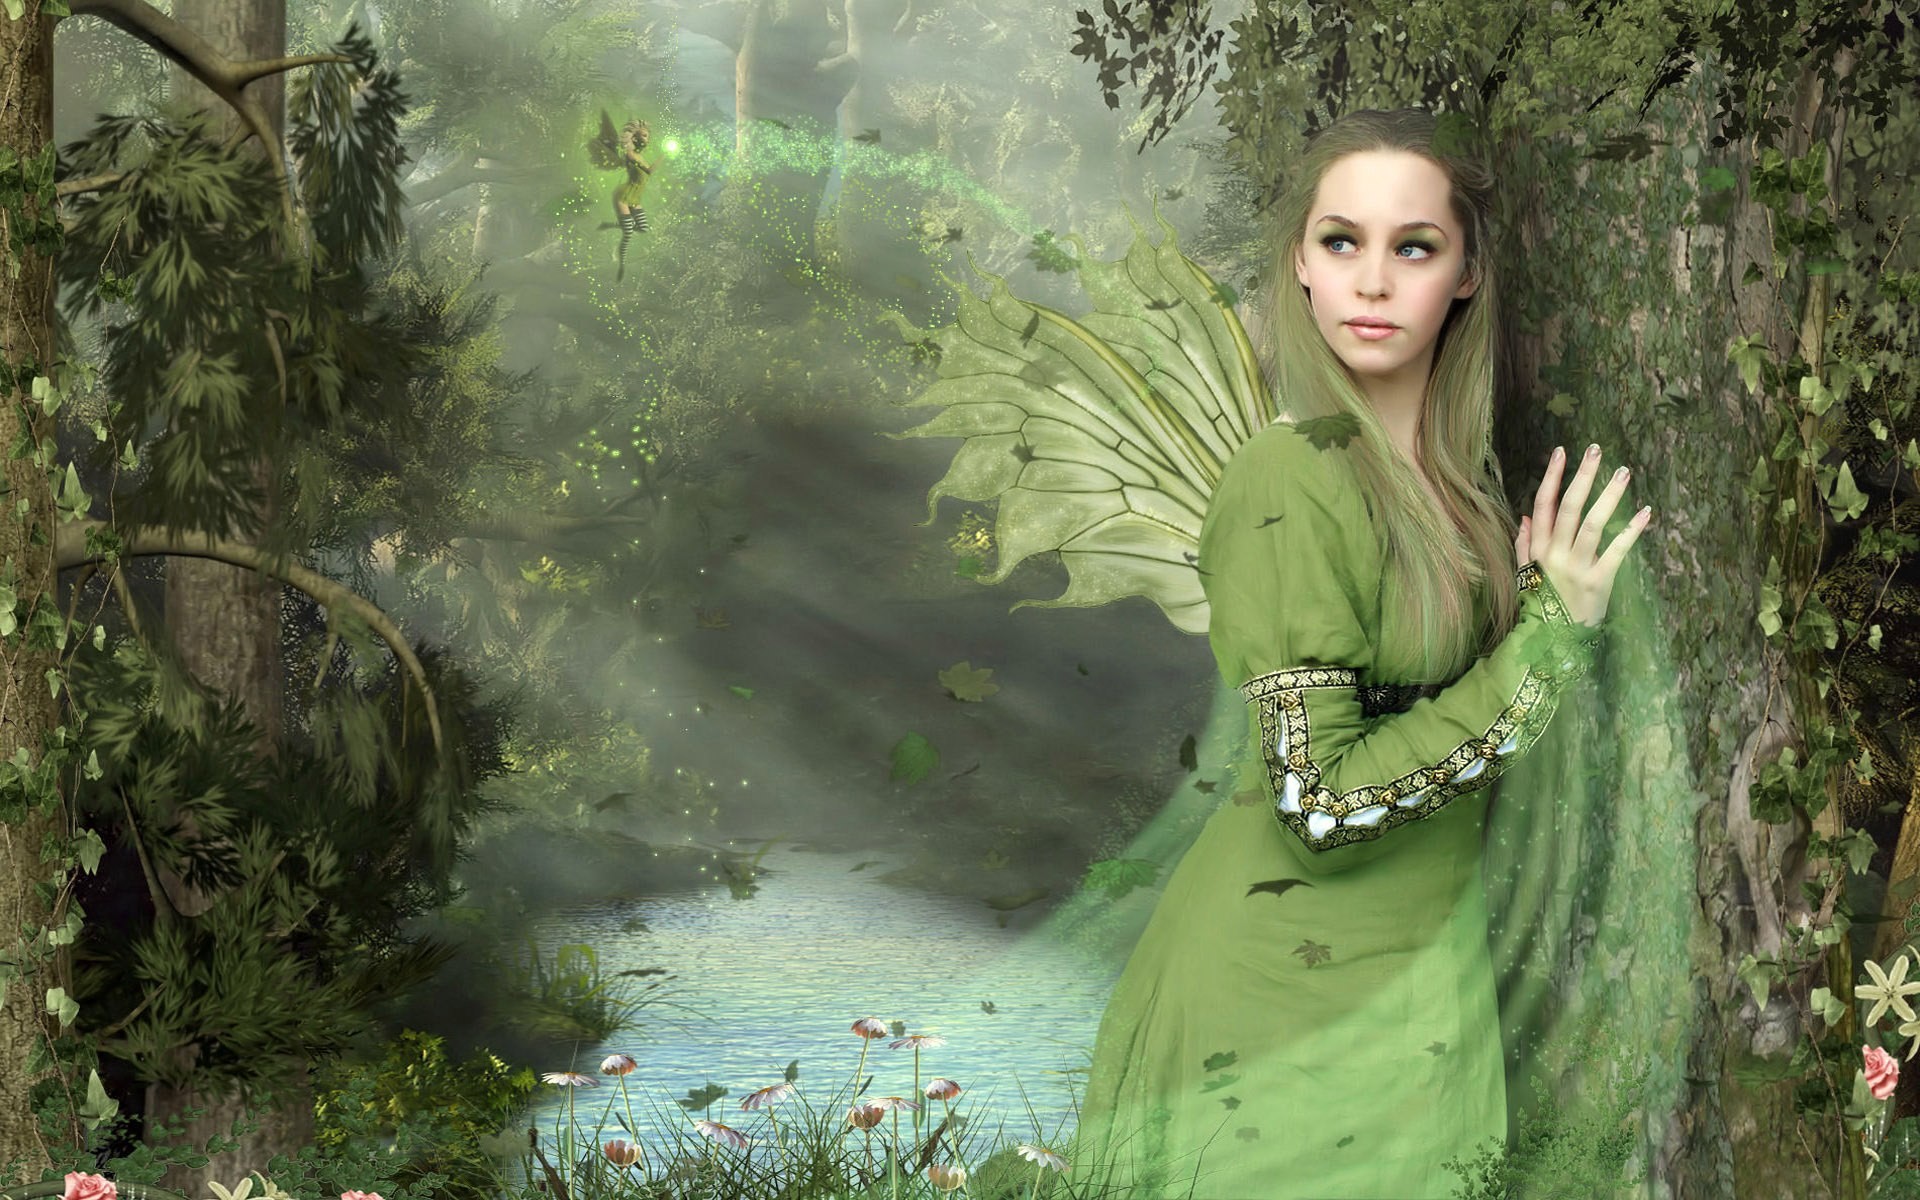 1920x1200 Forrest Green Fairy Girl wallpaper from Fairy wallpapers